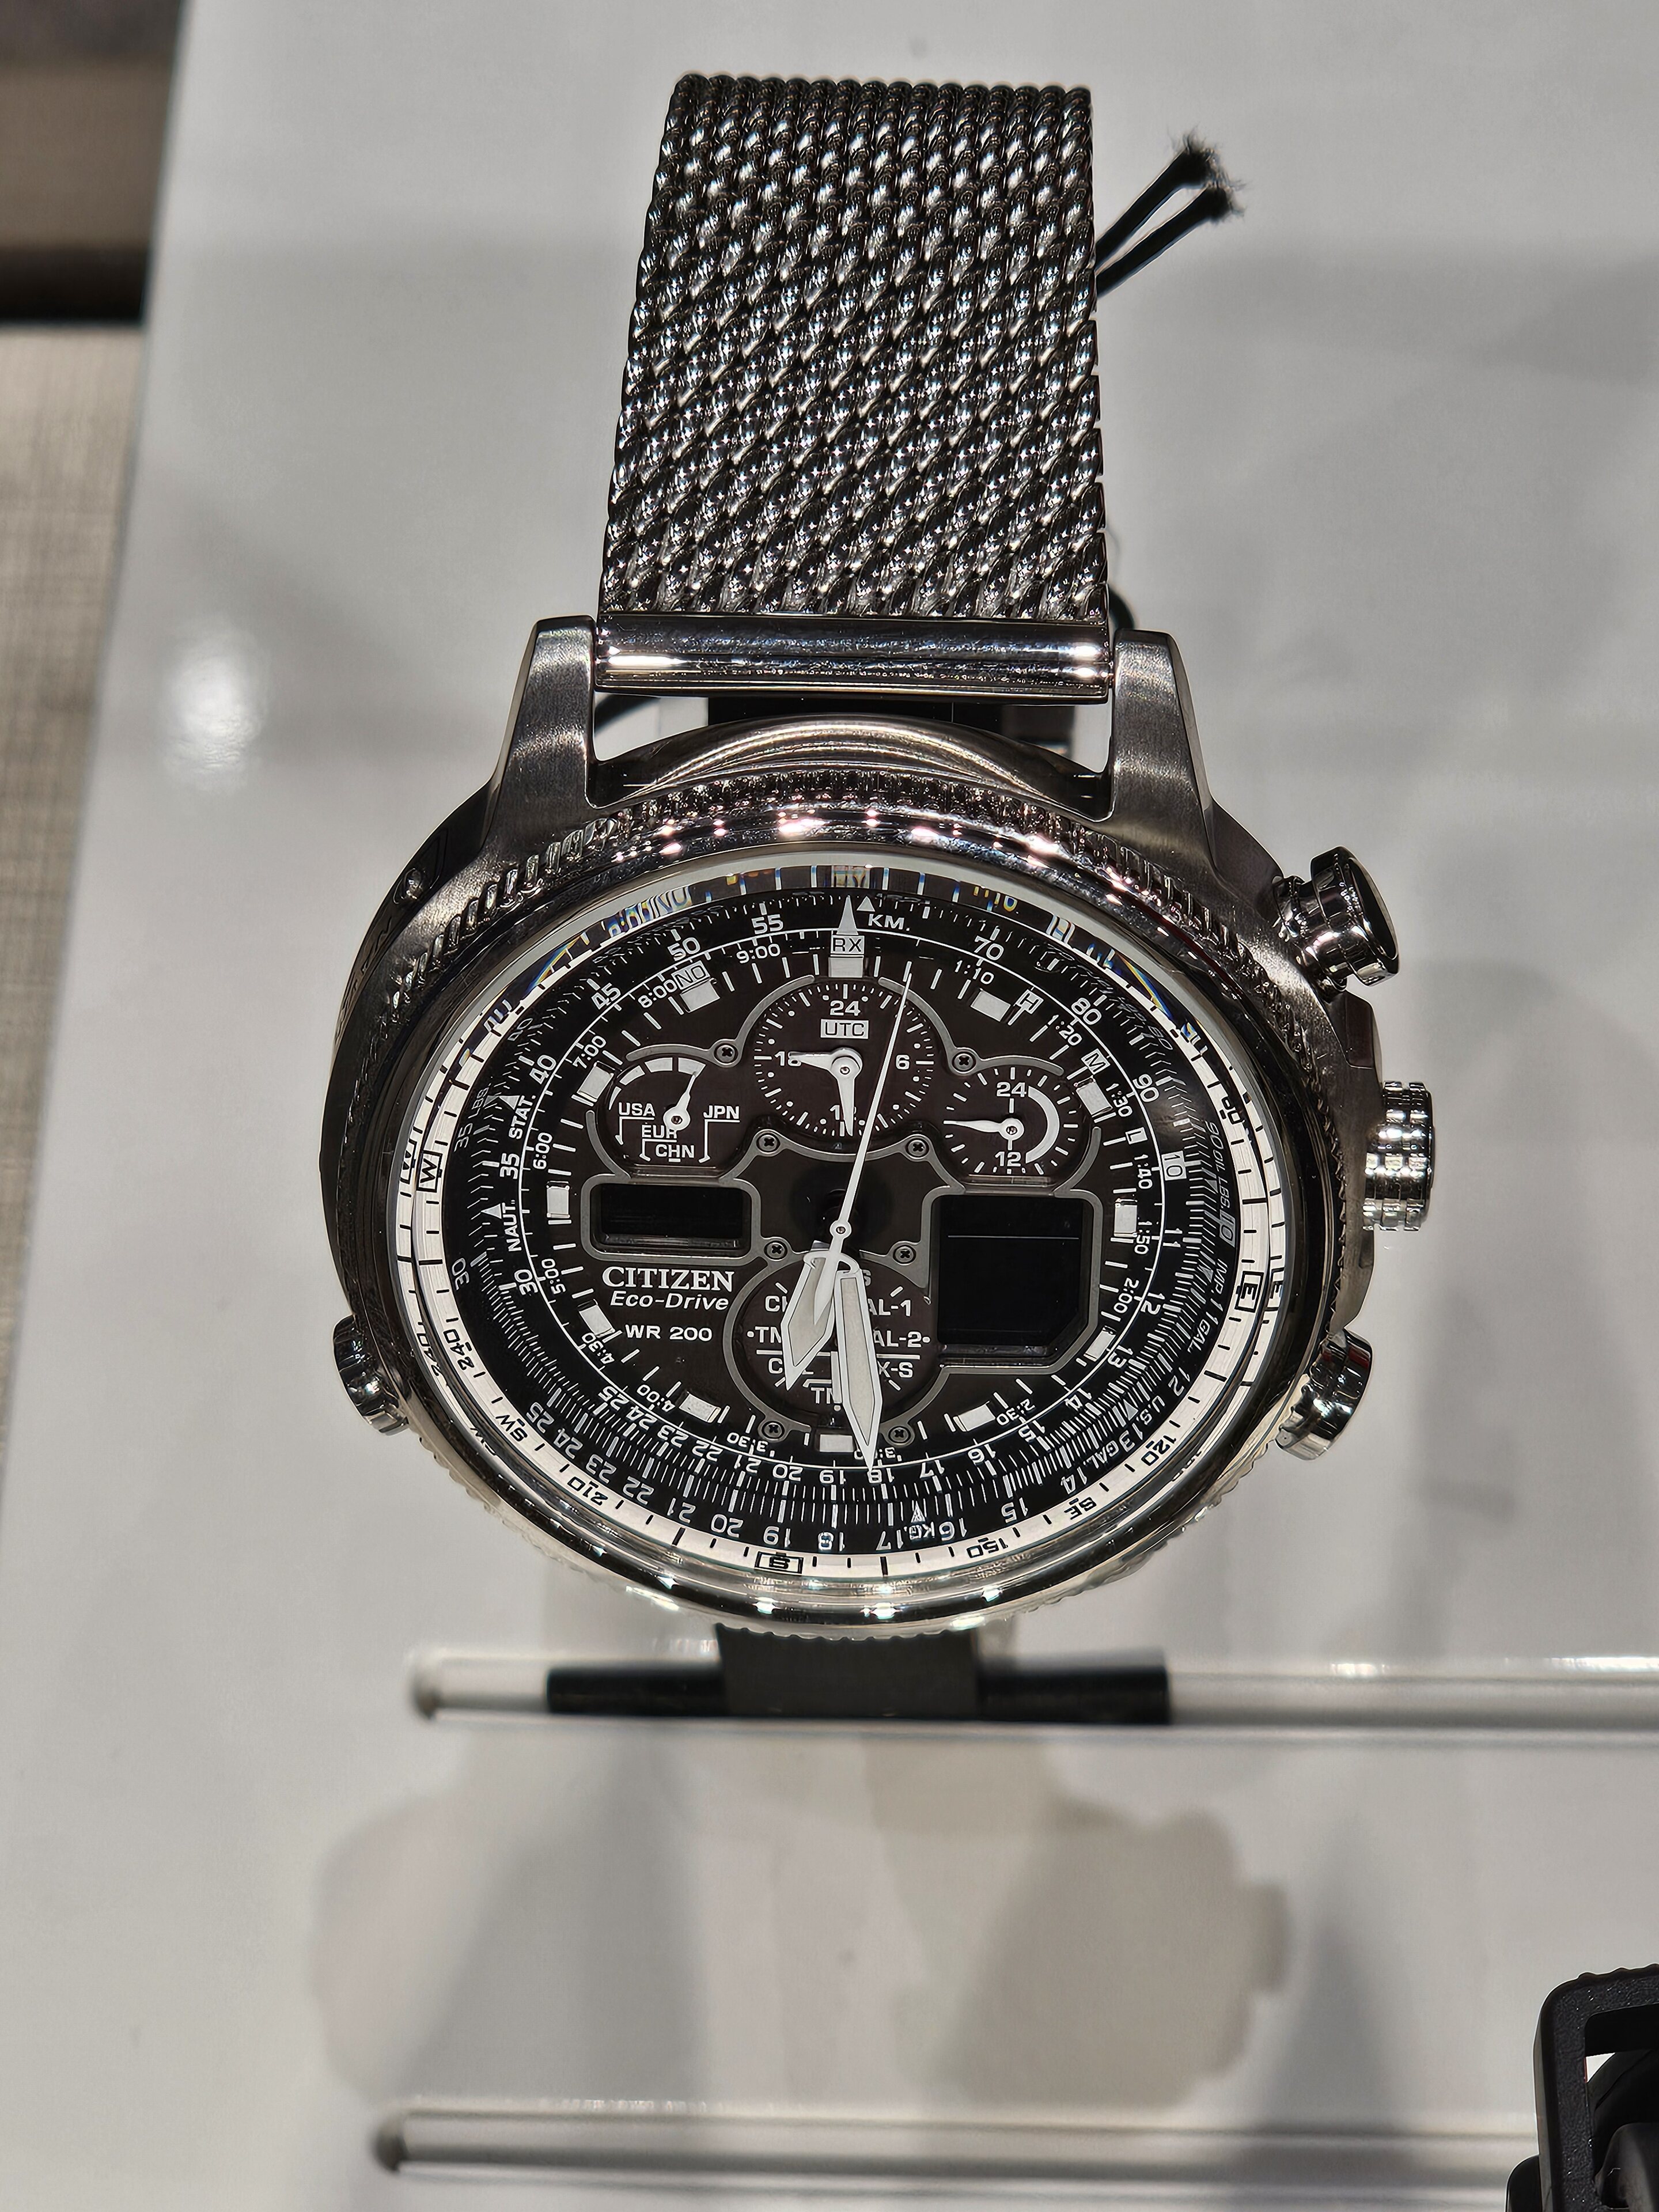 Pistonheads - The image showcases a wristwatch, prominently displayed on a stand against a white backdrop. It is an elegant piece featuring a black and gold color scheme, with the face of the watch clearly visible. A black strap wraps around the watch, adding to its sophistication. In the background, there's a display case that gives off a sense of luxury and exclusivity. The overall setting suggests that this might be part of an exhibition or display at a store specializing in luxury items.